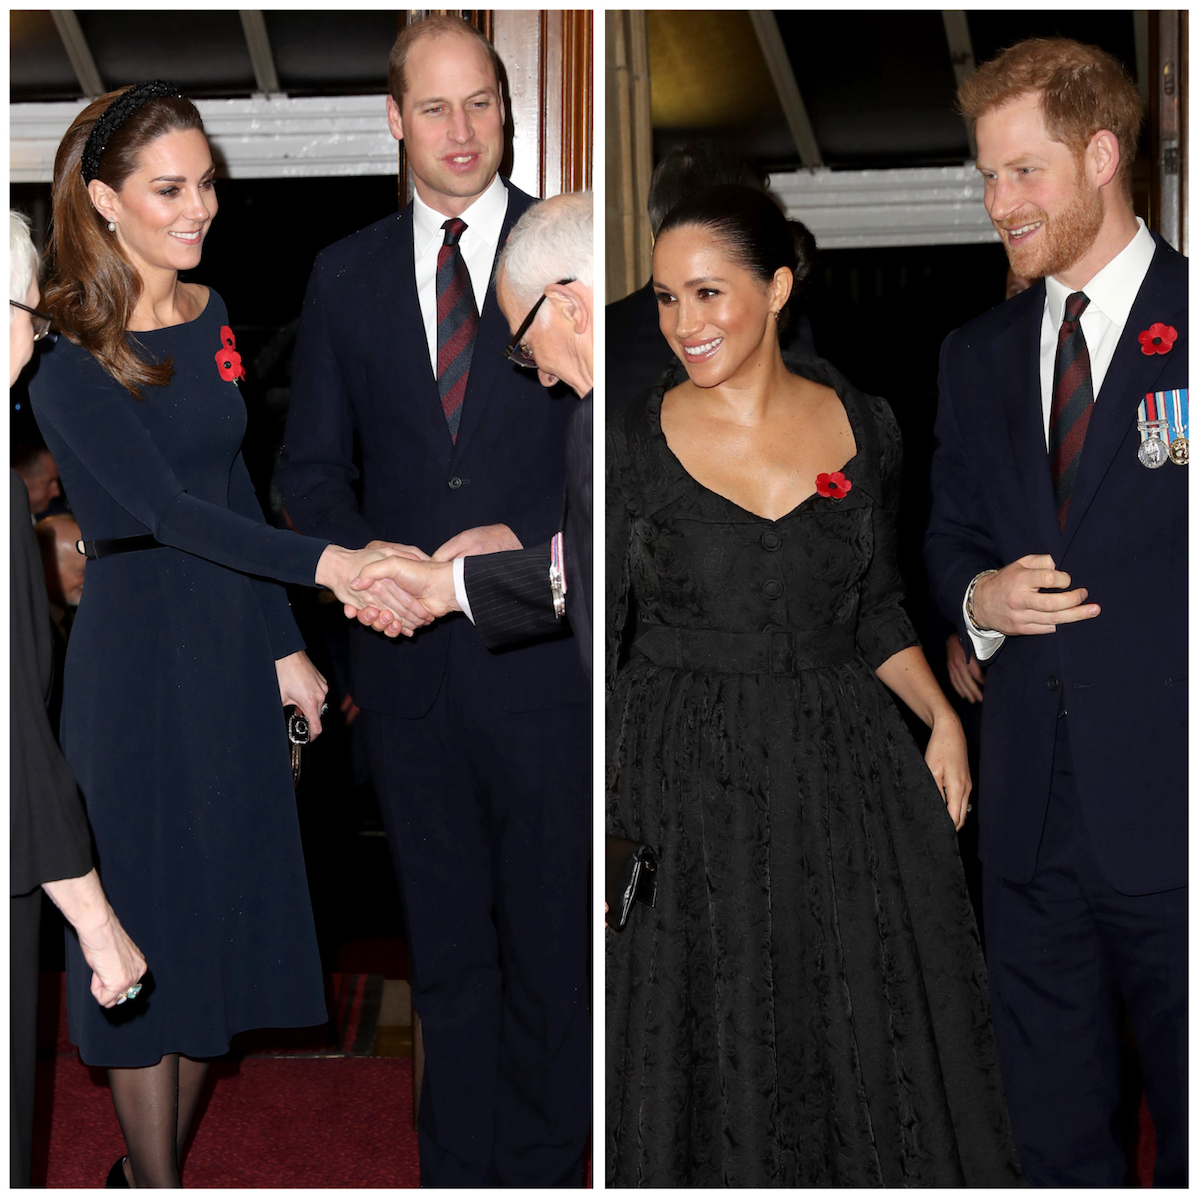 Kate Middleton and Prince William, who according to a body language expert appeared 'happier' than Prince Harry and Meghan Markle at the 2019 Festival of Remembrance greet people; Meghan Markle and Prince Harry smile at the 2019 Festival of Remembrance 